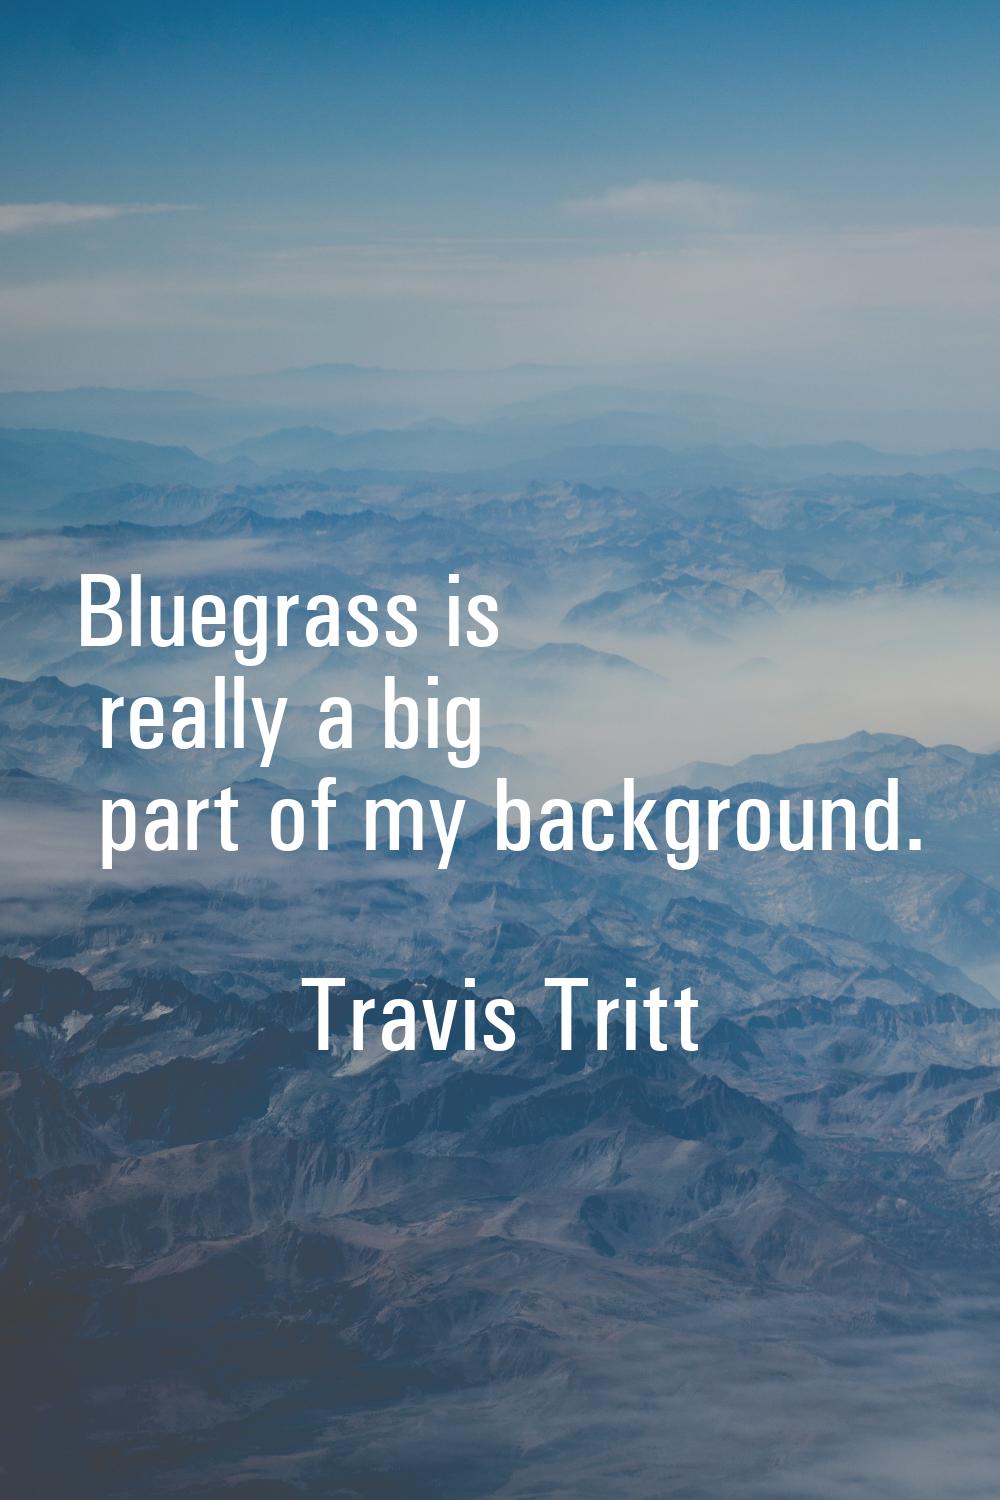 Bluegrass is really a big part of my background.